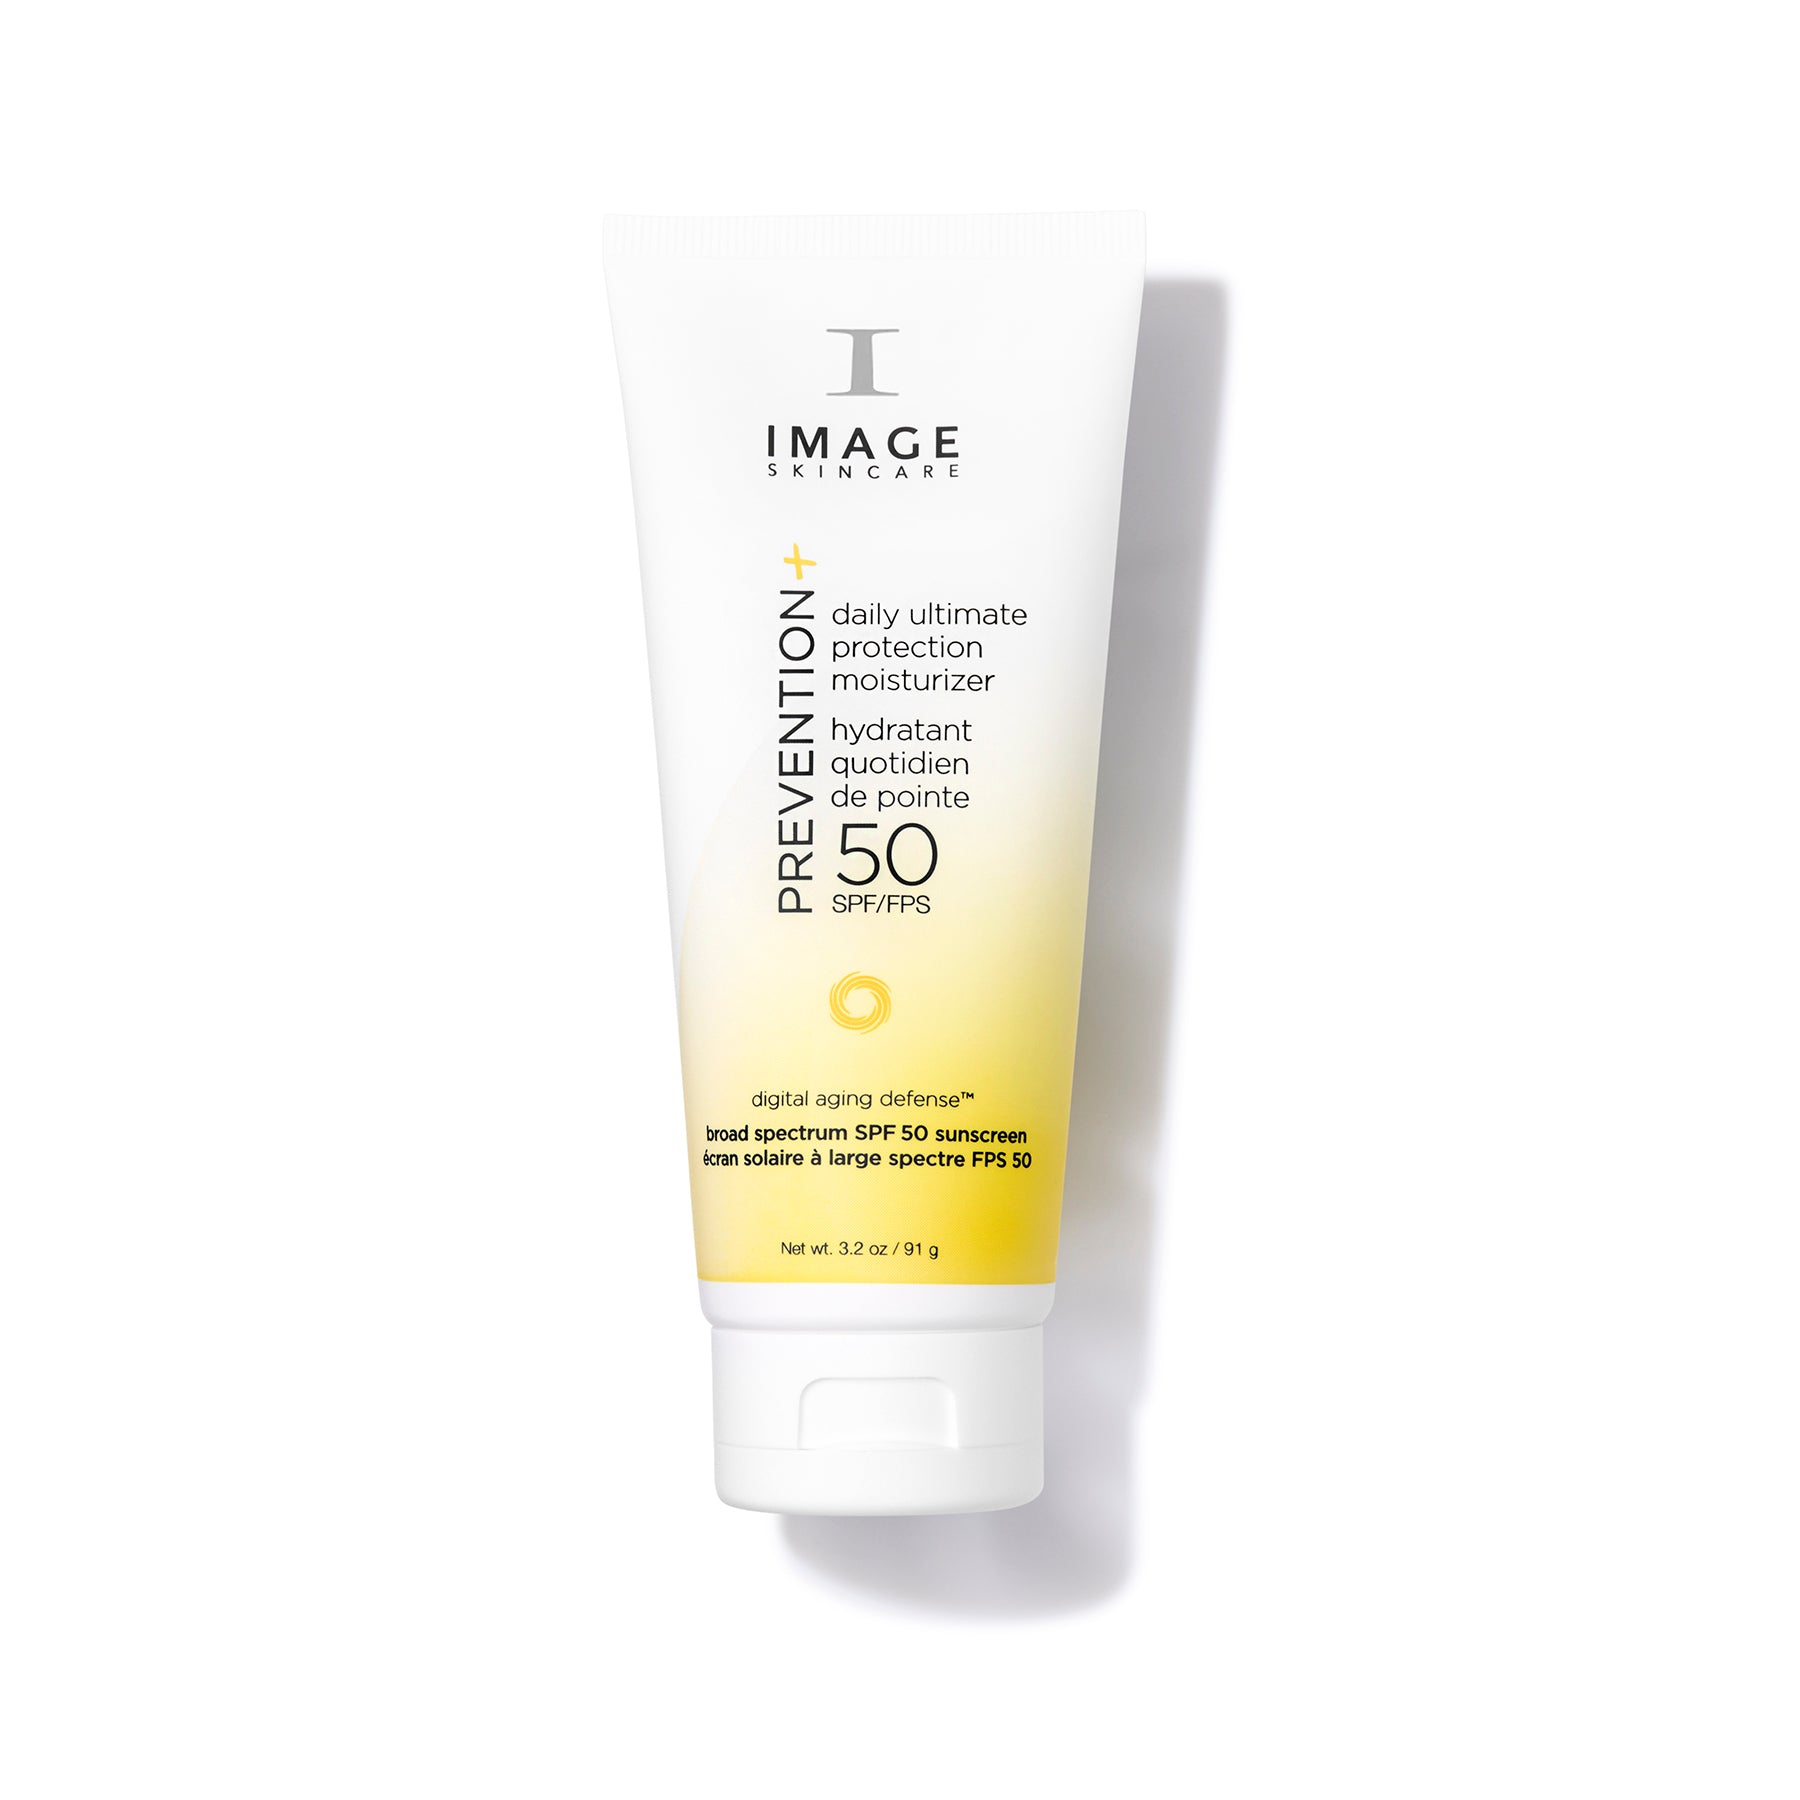 Image Skincare Prevention Daily ultimate Protection Moisturizer 50